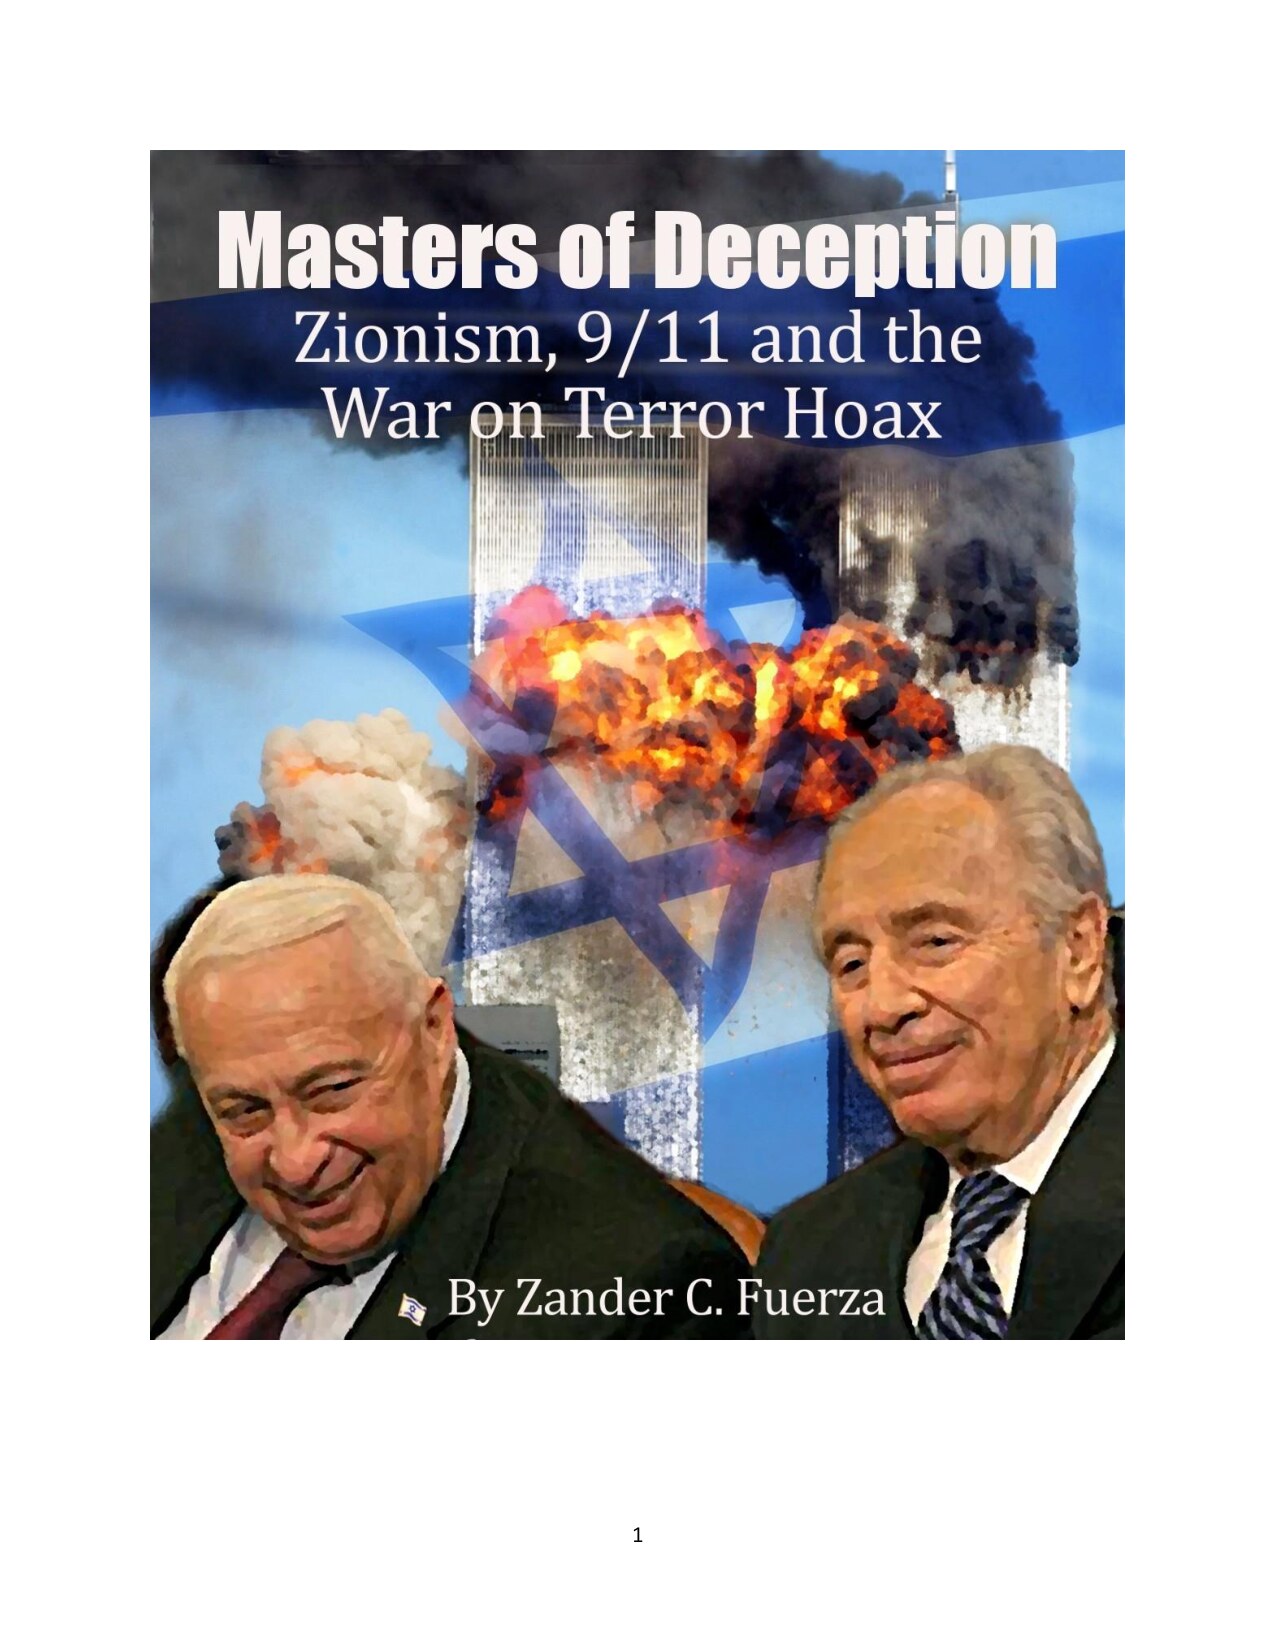 Martinez, Brandon; Masters Of Deception - Zionism, 9-11 and the War on Terror Hoax